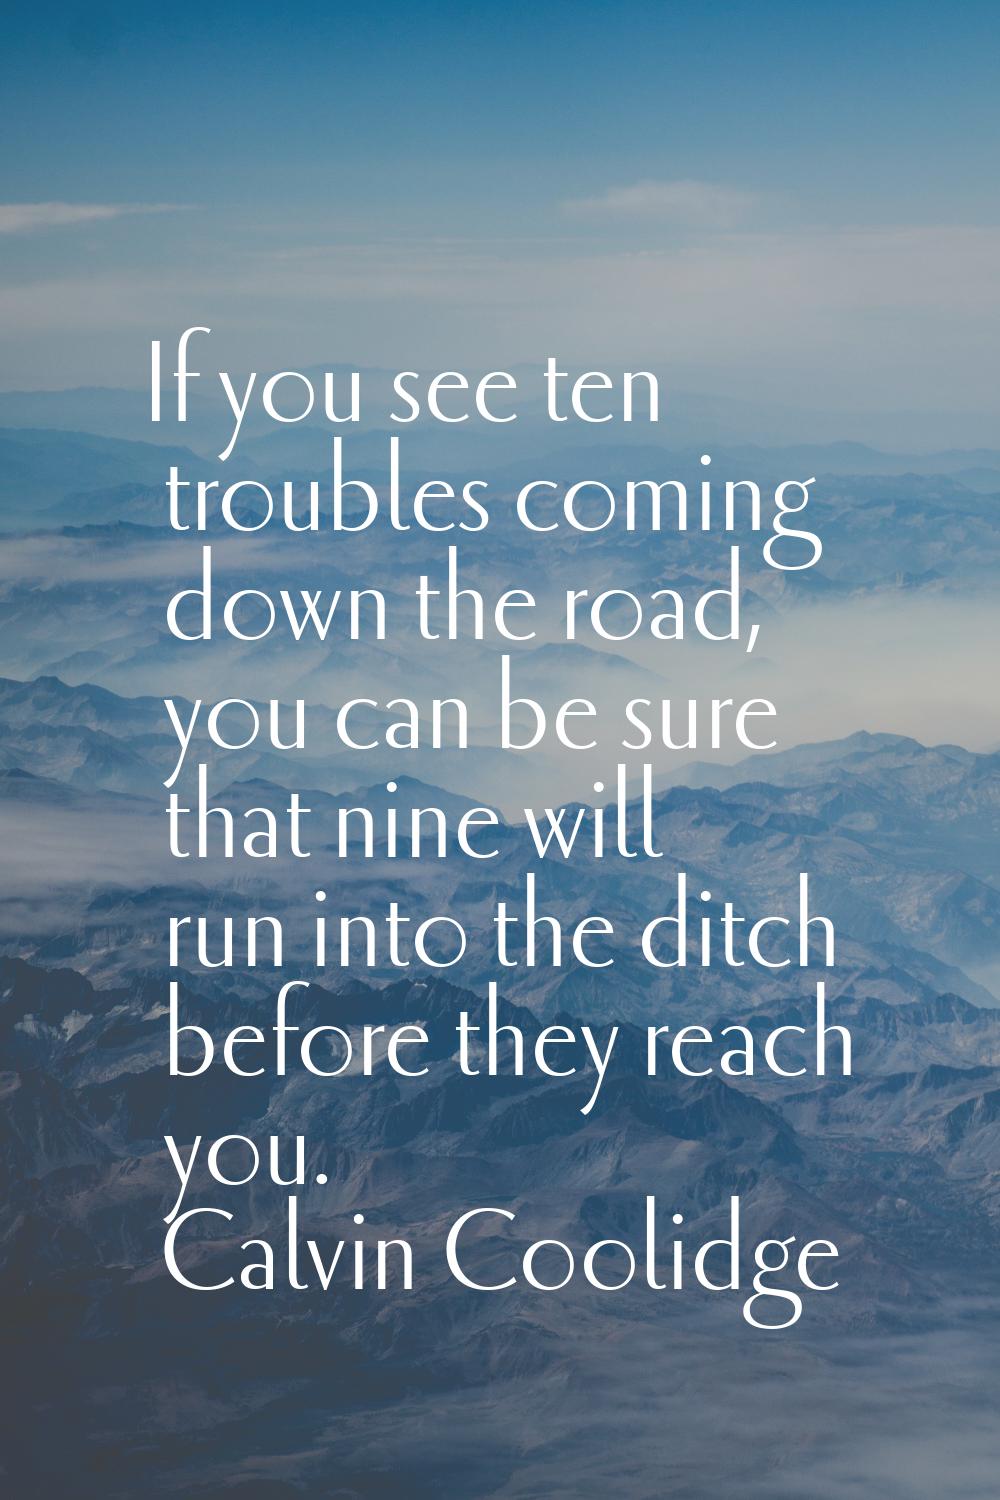 If you see ten troubles coming down the road, you can be sure that nine will run into the ditch bef